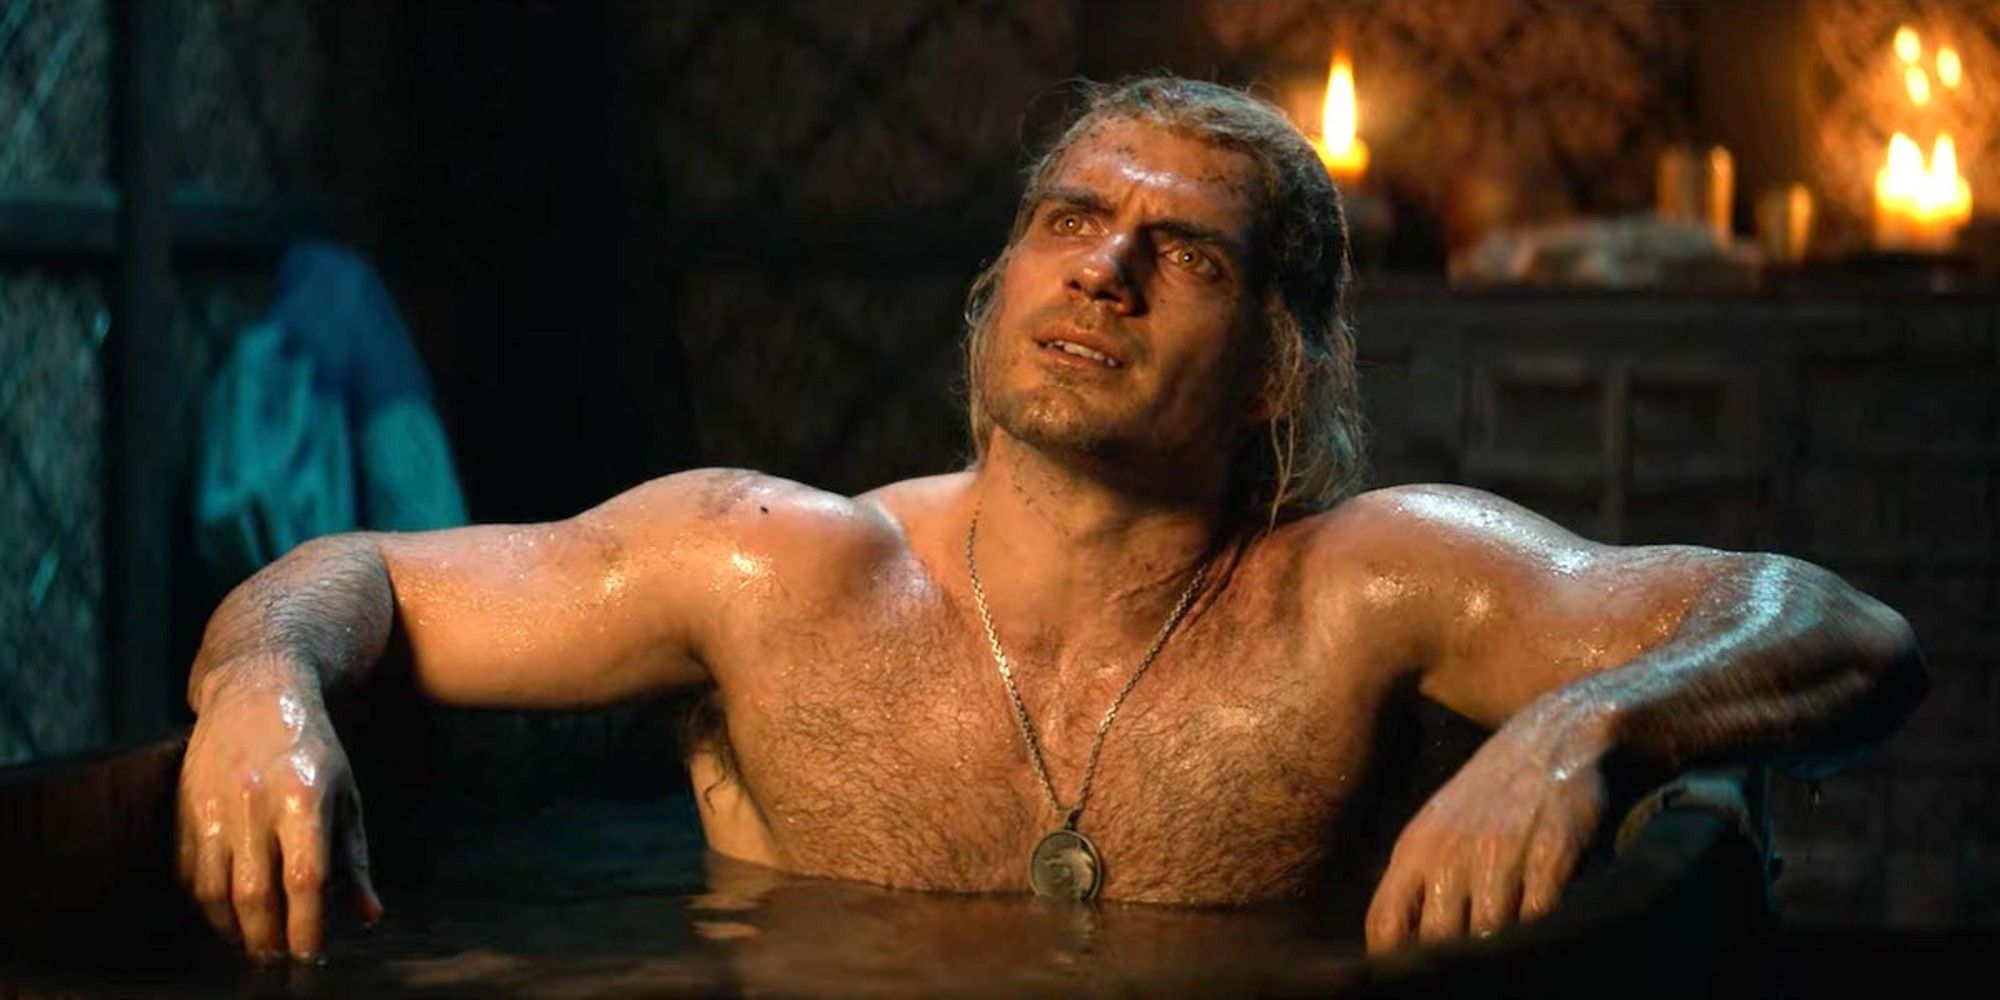 the-witcher-3-s-bath-tub-scene-turned-into-a-cake